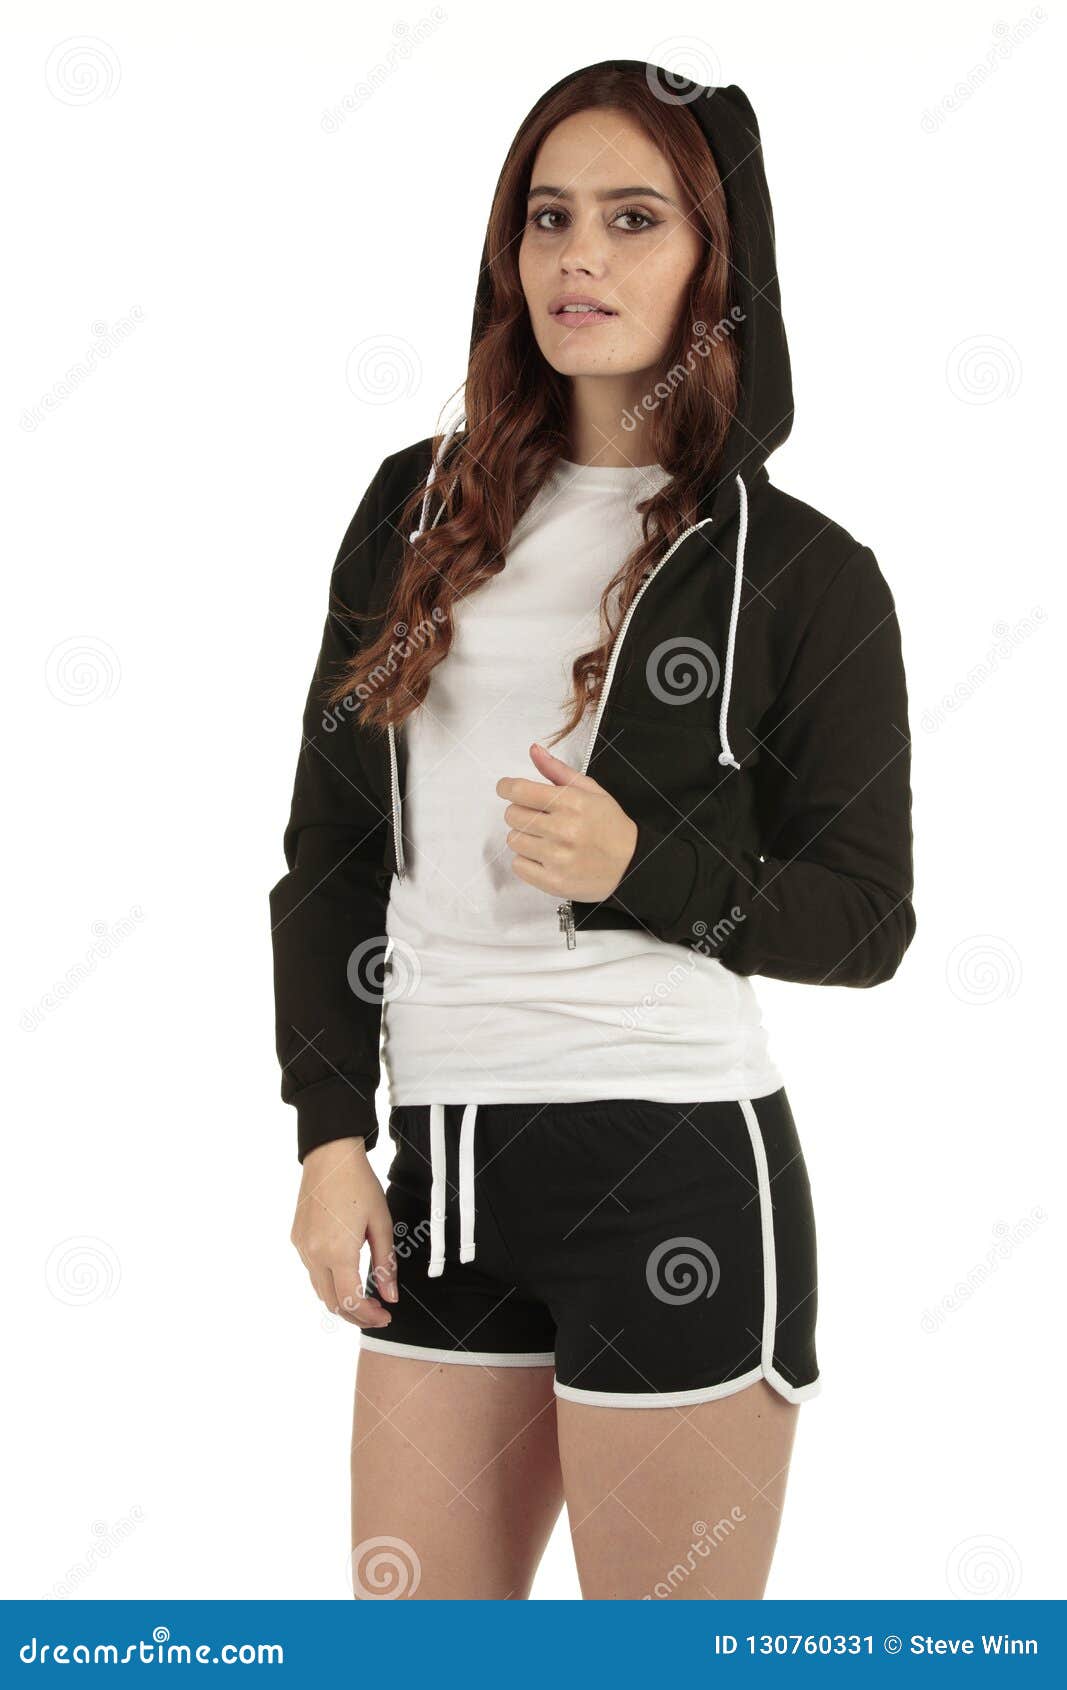 Vintage Styled Sports Fit Woman Going To the Gym in Her Blank White ...